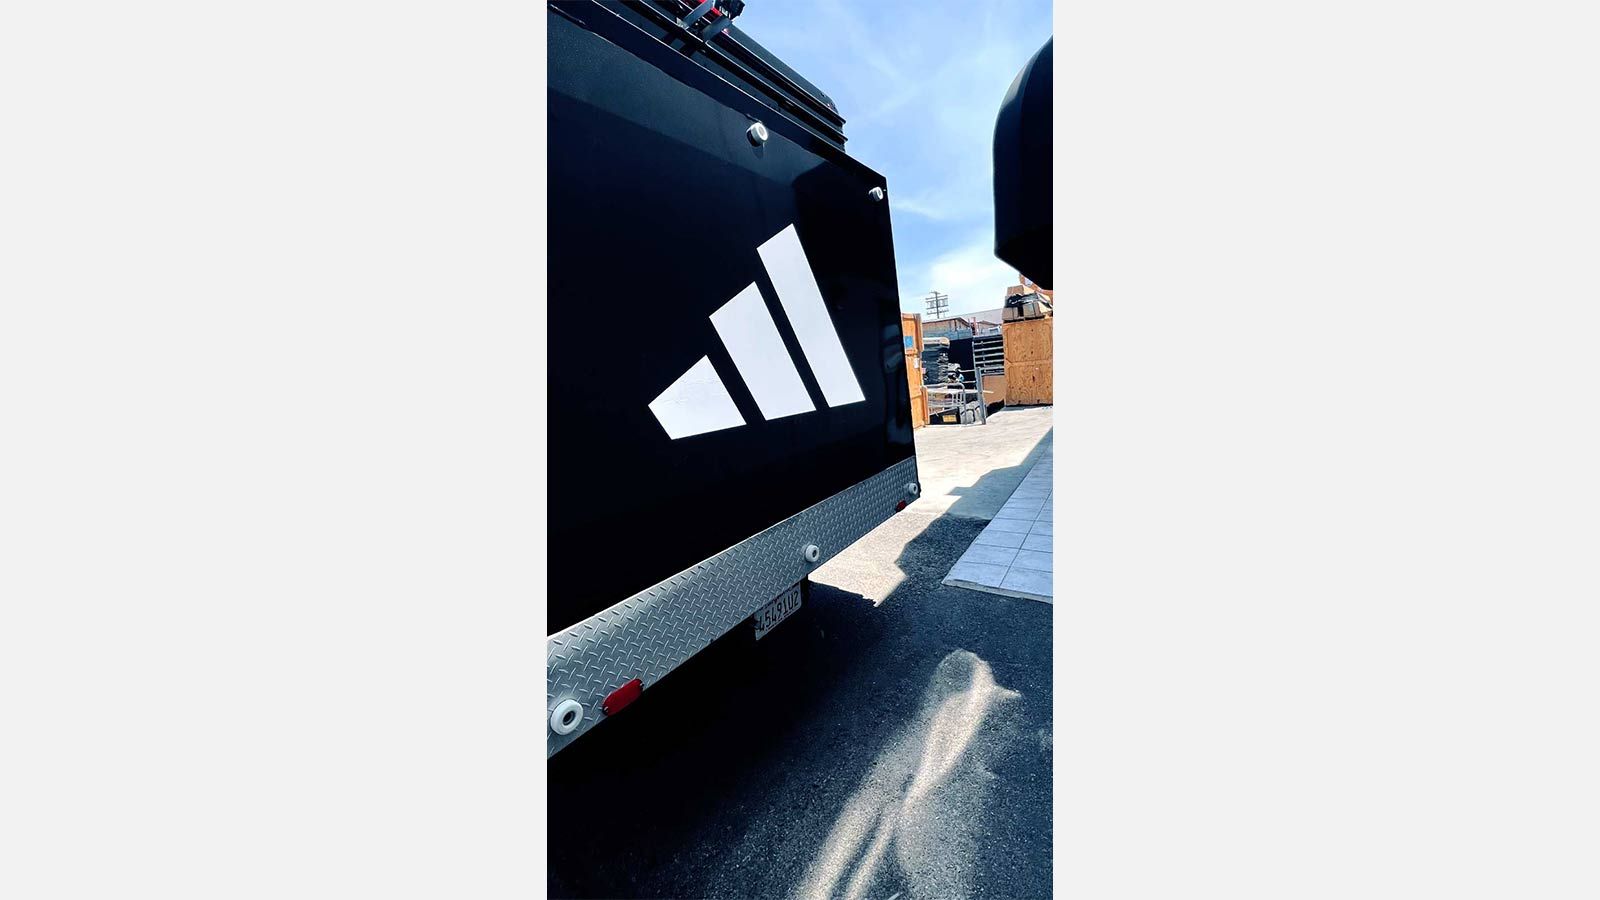 Adidas car wrap attached to the back of a truck